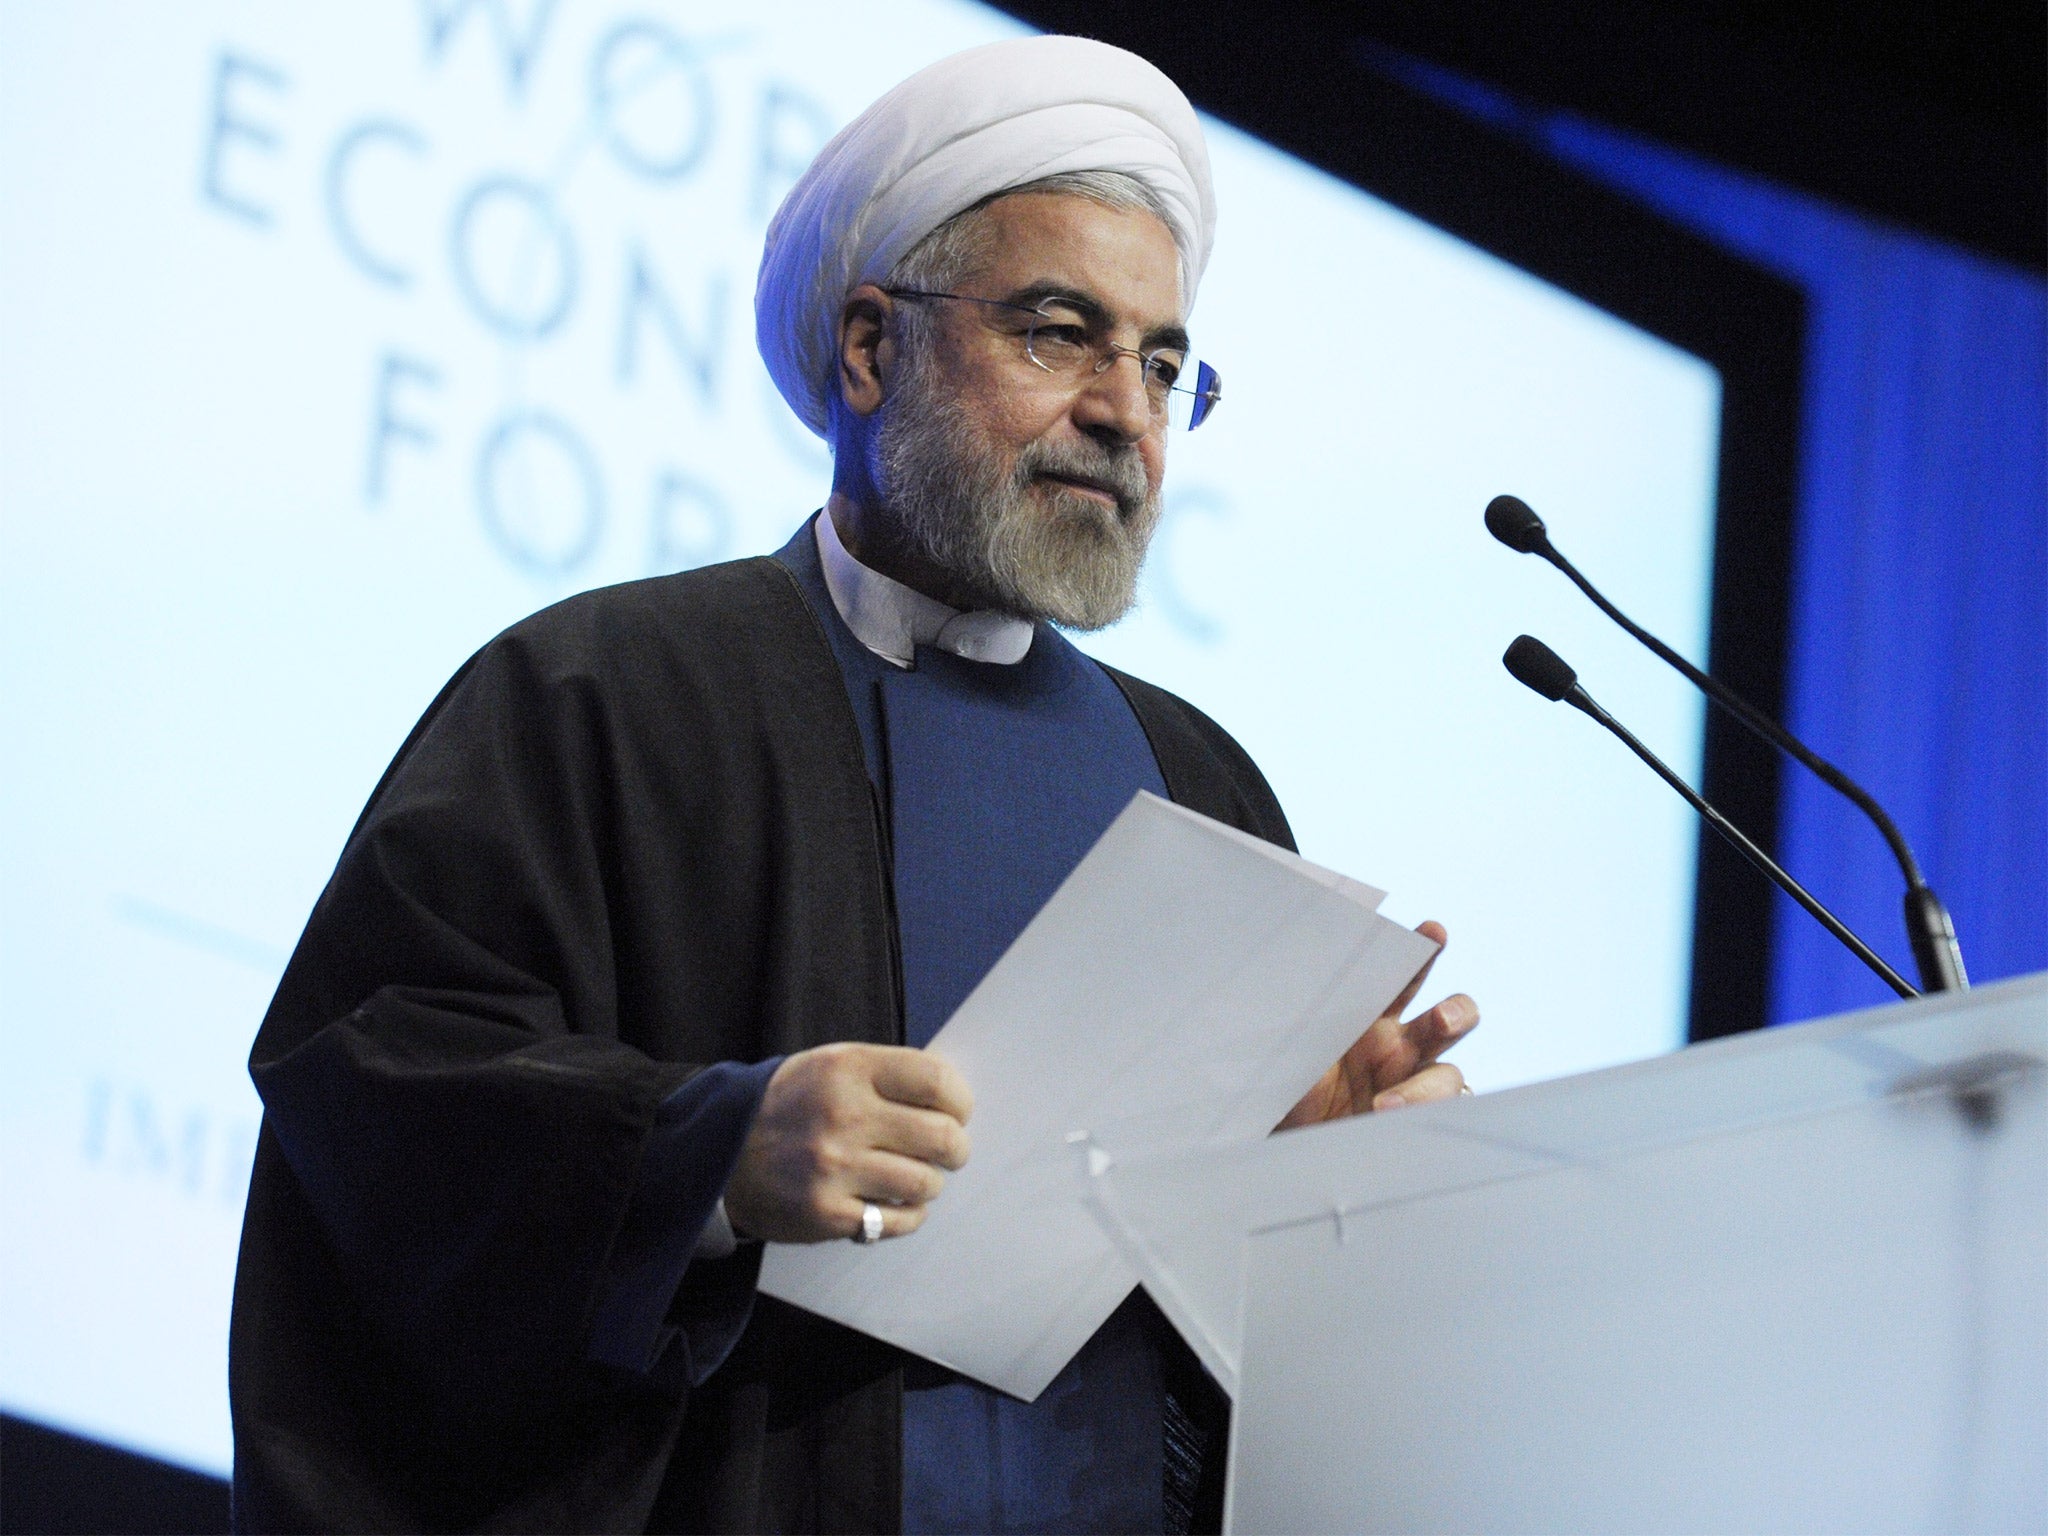 President Hassan Rouhani during his brief visit to the World Economic Forum in Davos last year